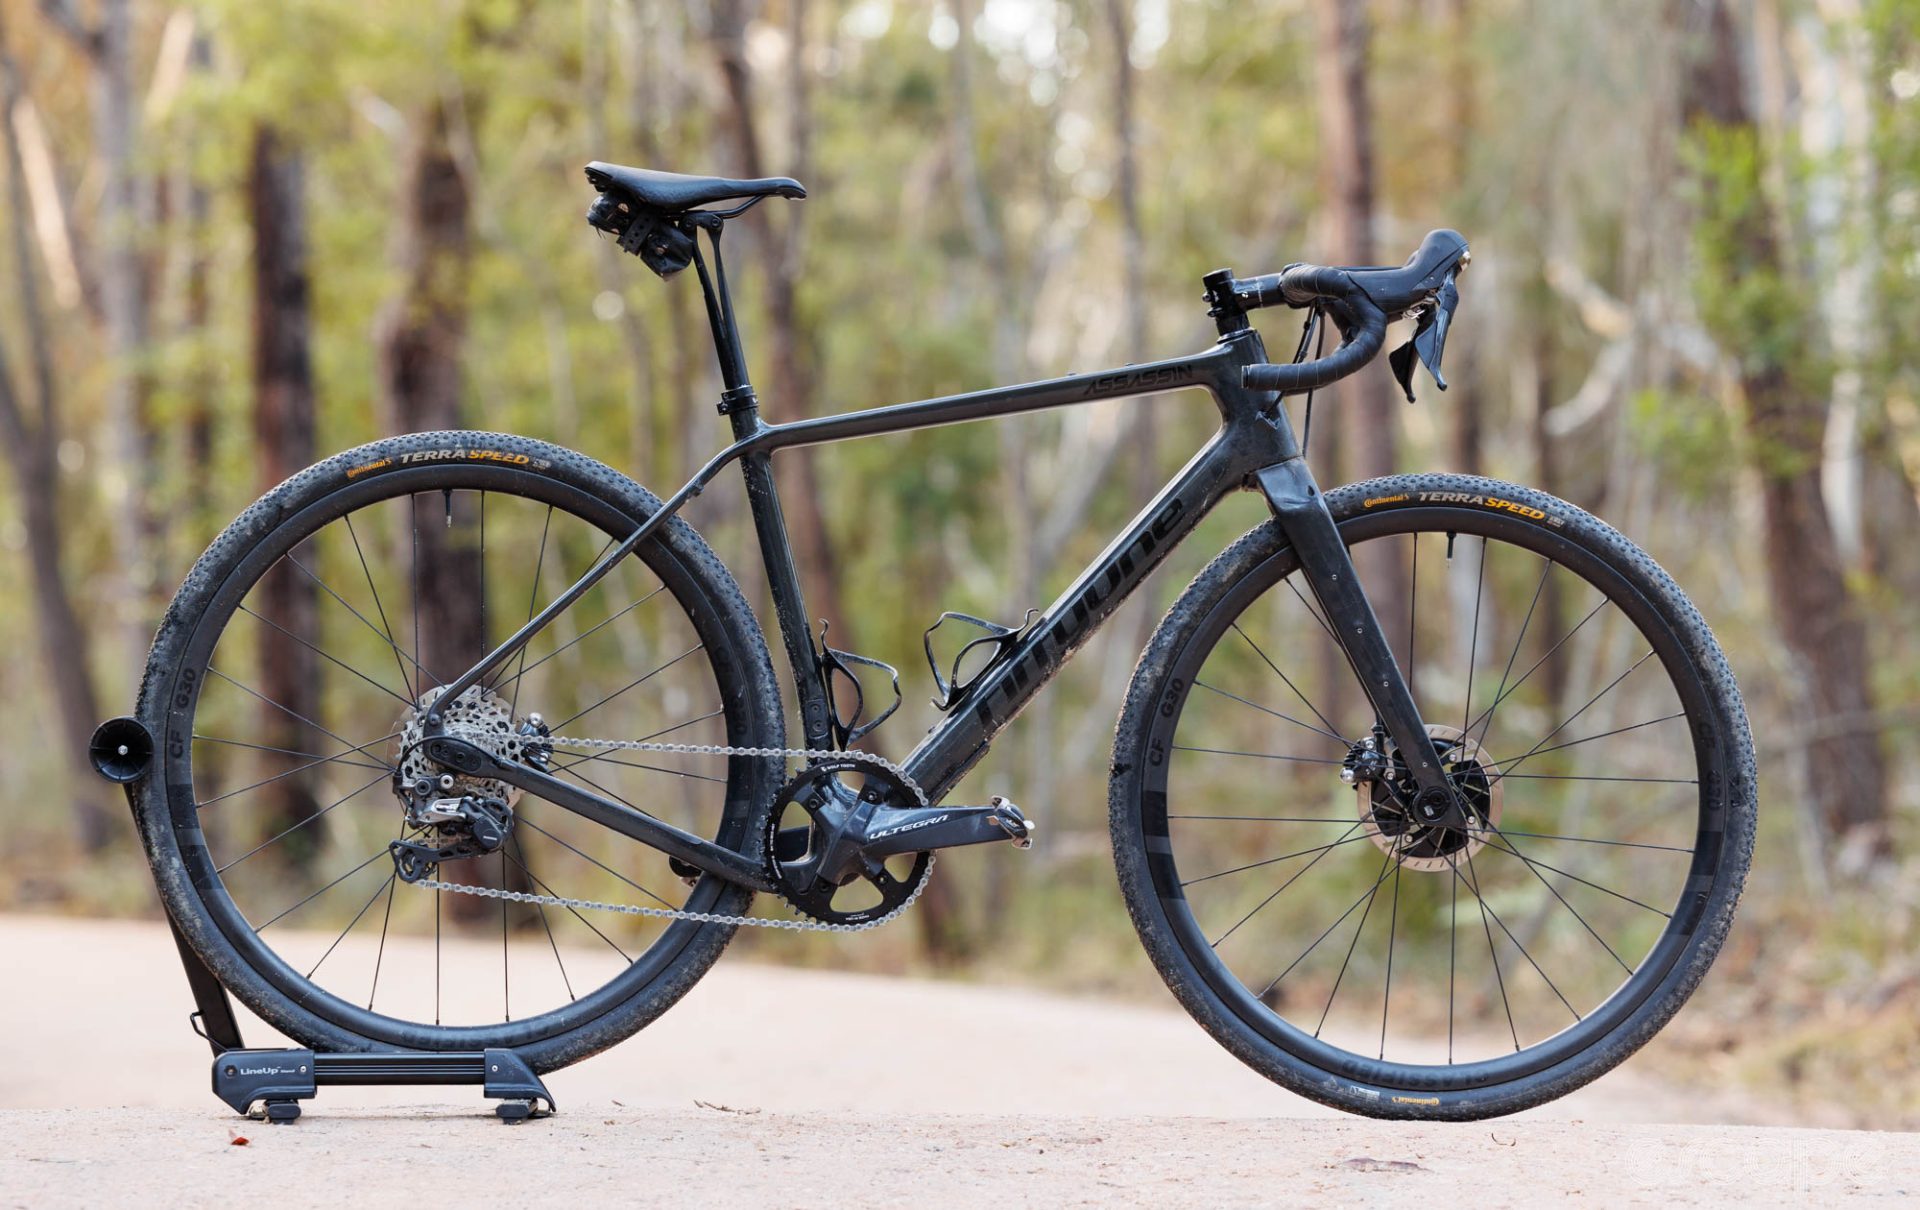 A FiftyOne Assassin gravel bike outfitted with Classified's Powershift hub system.